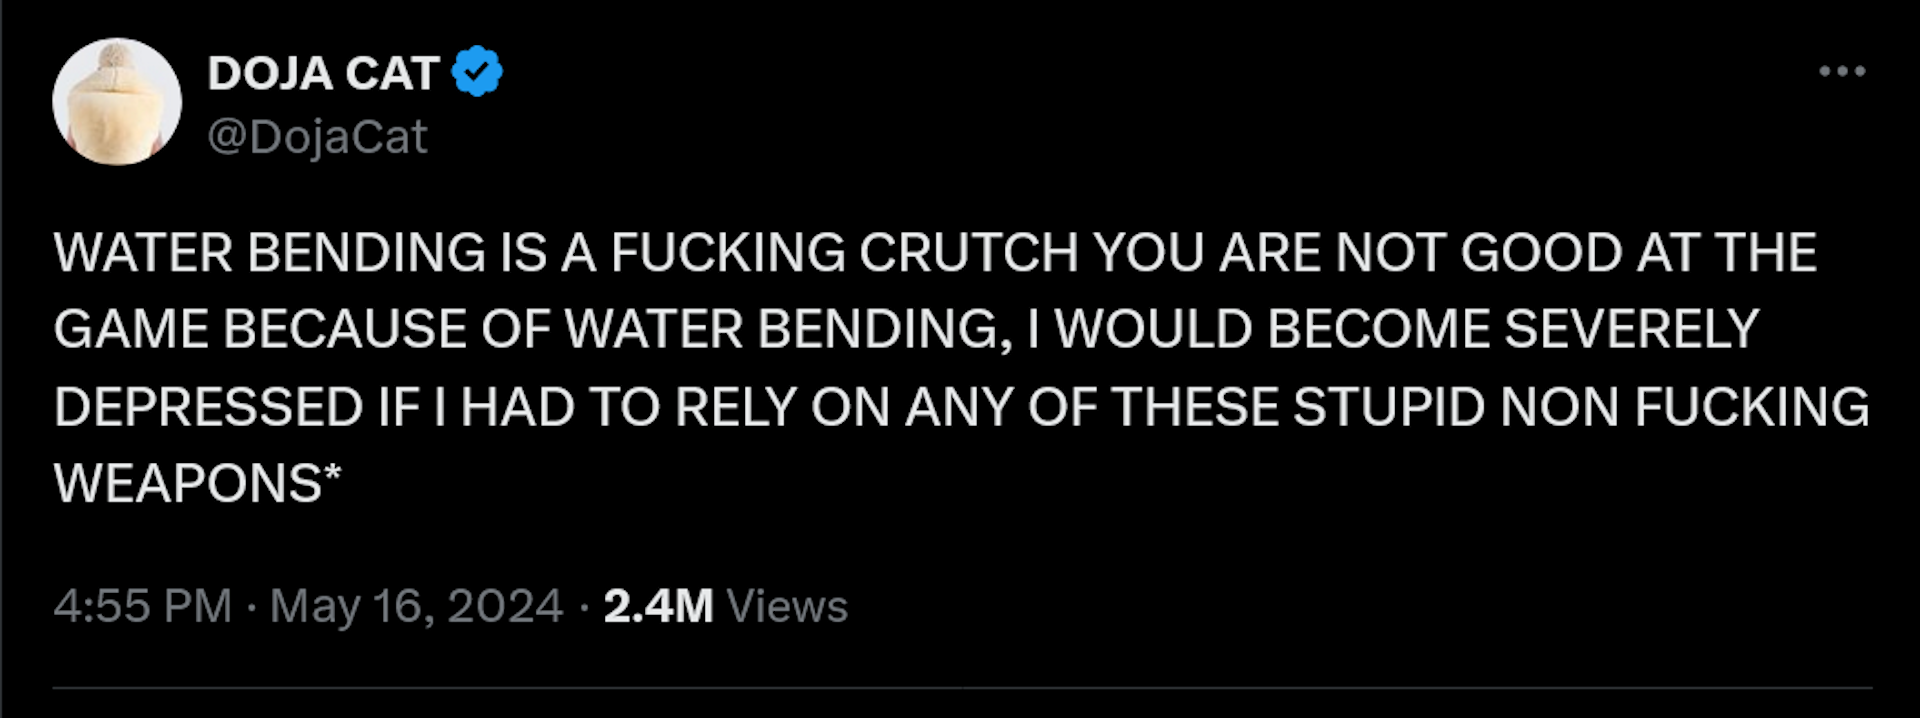 WATER BENDING IS A FUCKING CRUTCH YOU ARE NOT GOOD AT THE GAME BECAUSE OF WATER BENDING, I WOULD BECOME SEVERELY DEPRESSED IF I HAD TO RELY ON ANY OF THESE STUPID NON FUCKING WEAPONS*